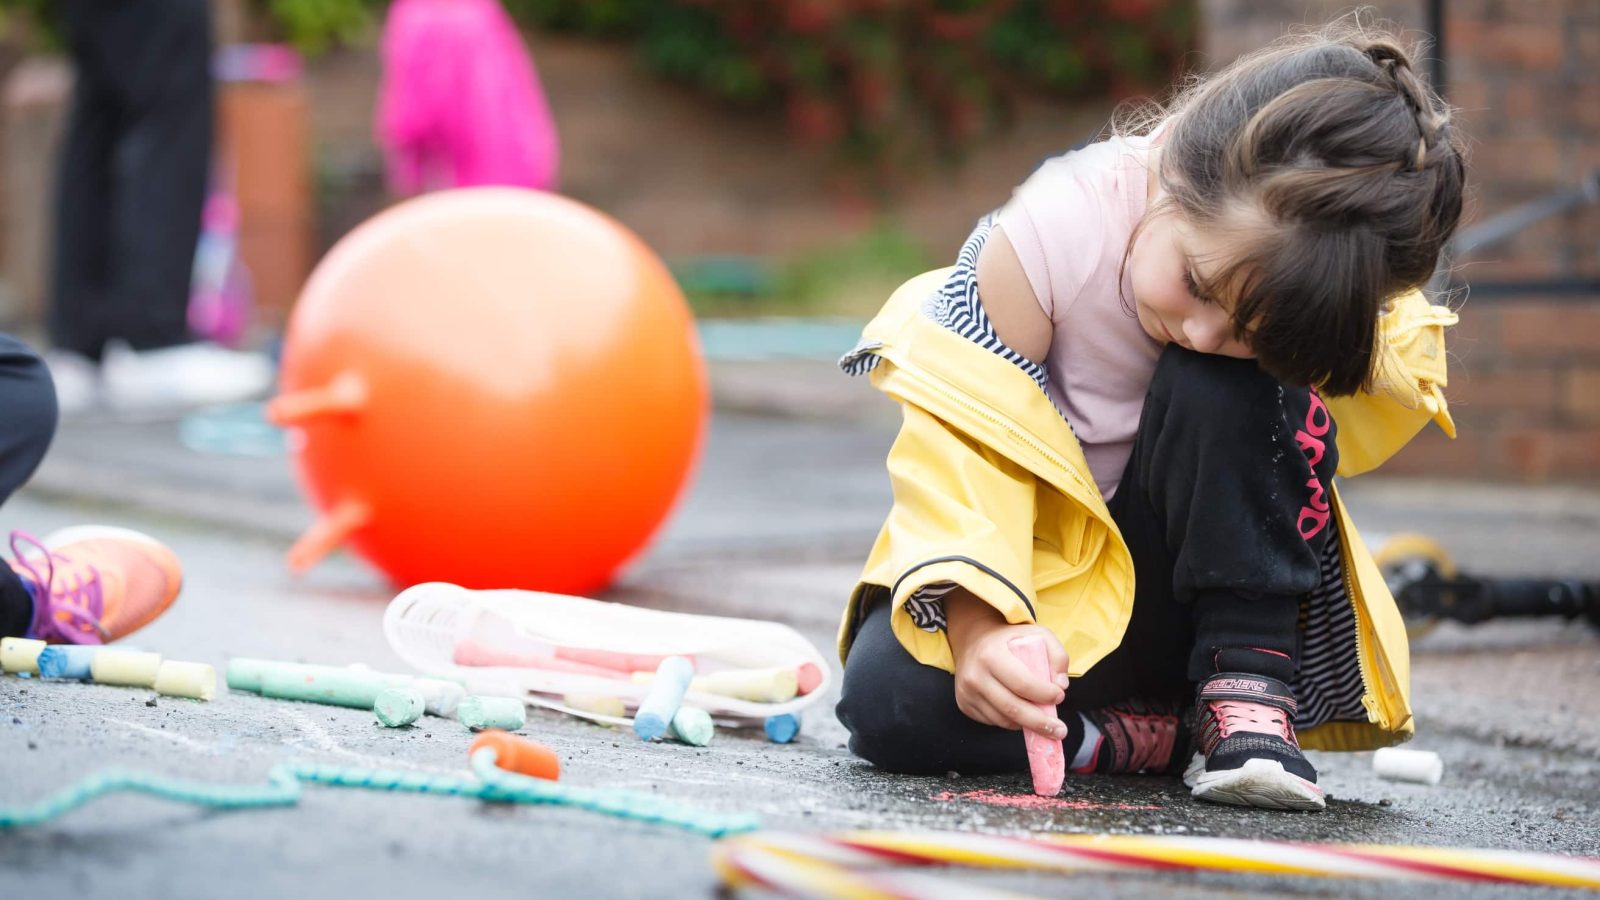 A young girl in a yellow raincoat kneels on a driveway, drawing with pink chalk. There are scattered toys and colorful sidewalk chalk around her.